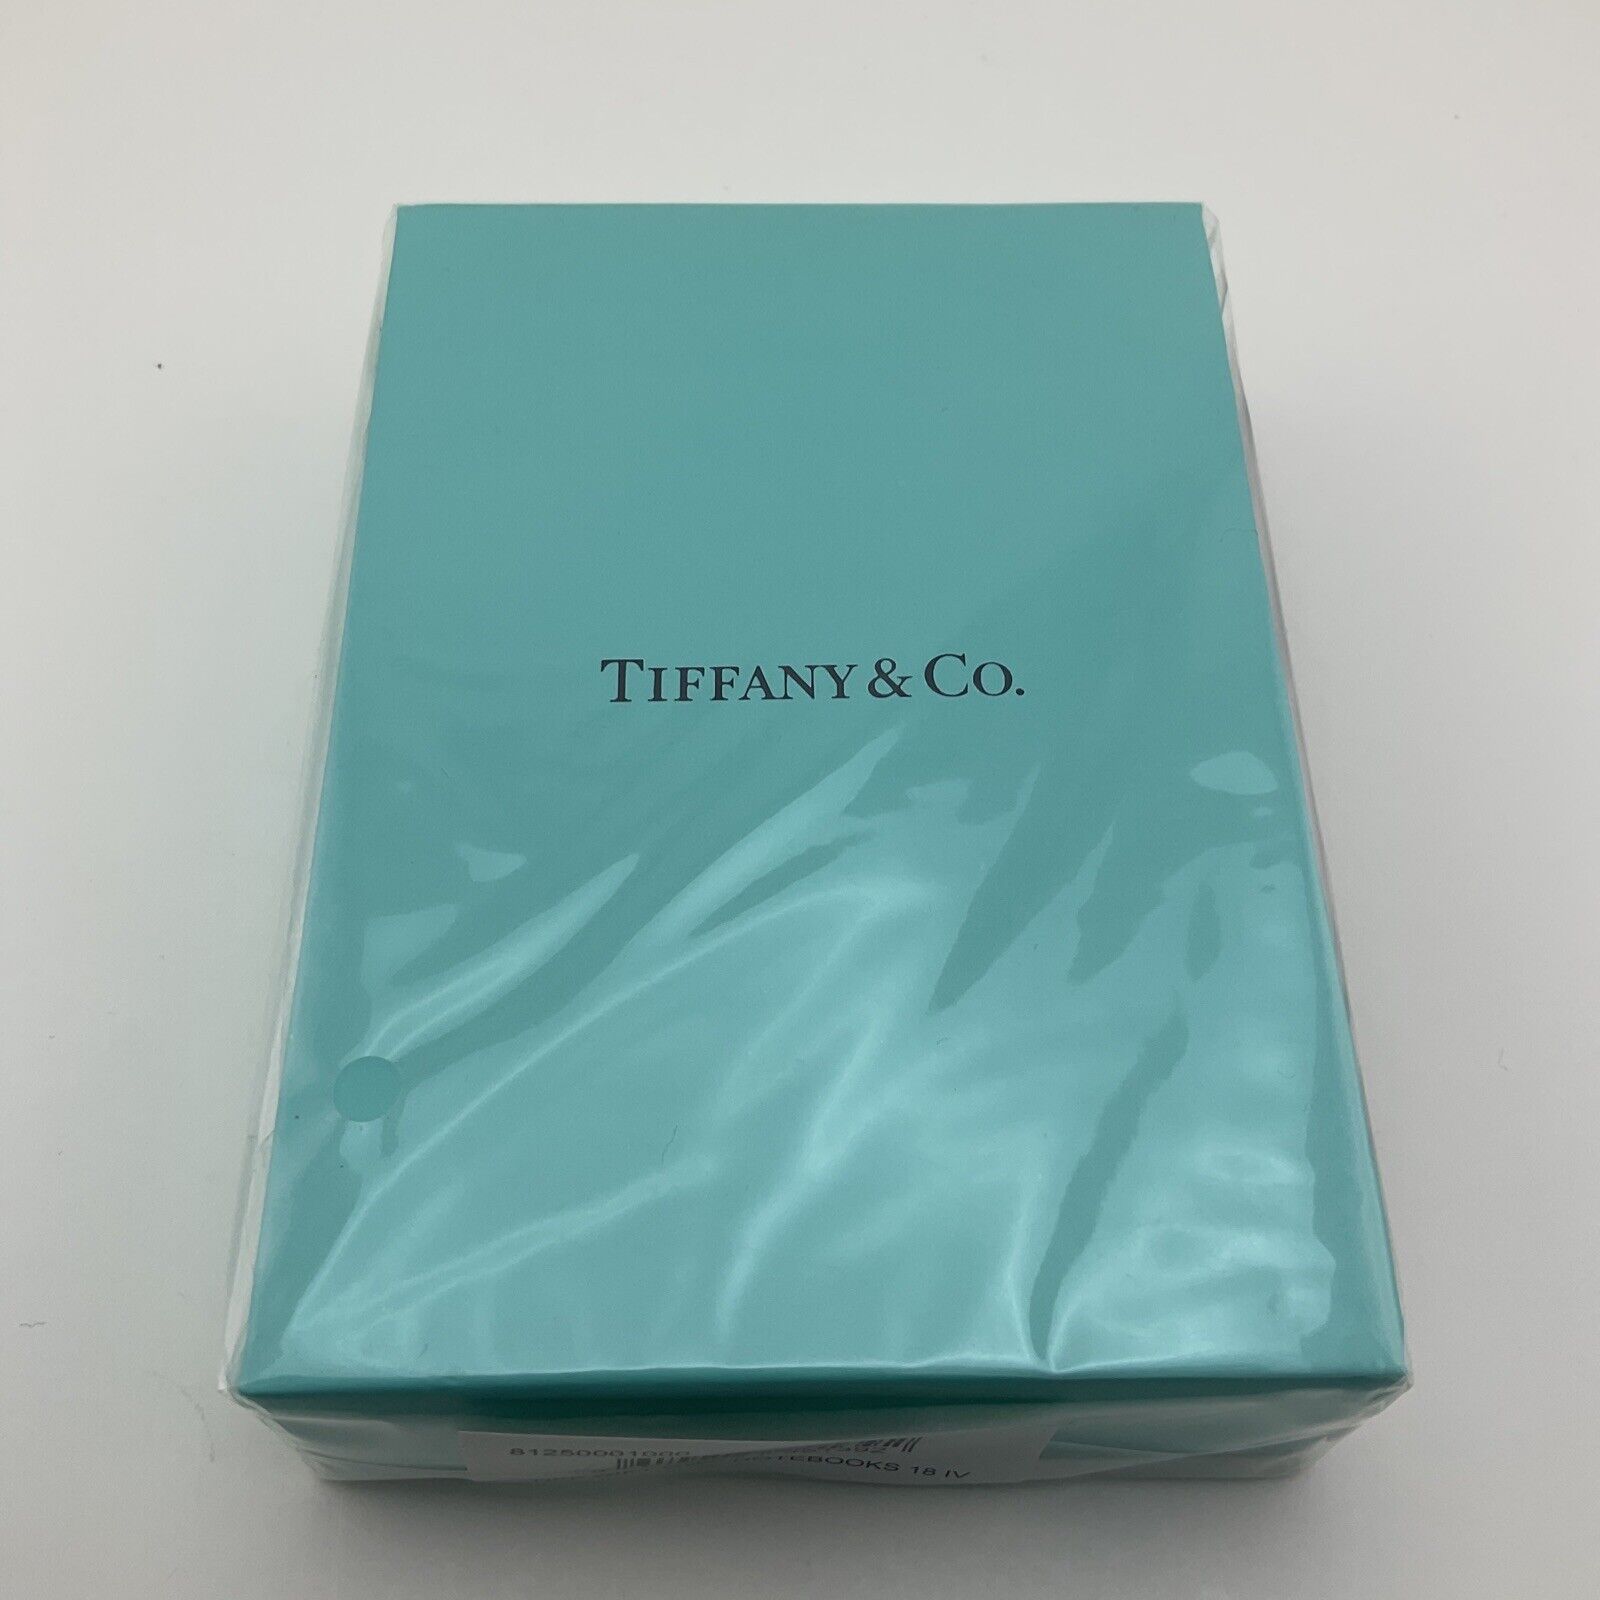 Tiffany & Co. Mini Notebook Set of 3 in Case Sealed Limited Edition Promo Gift